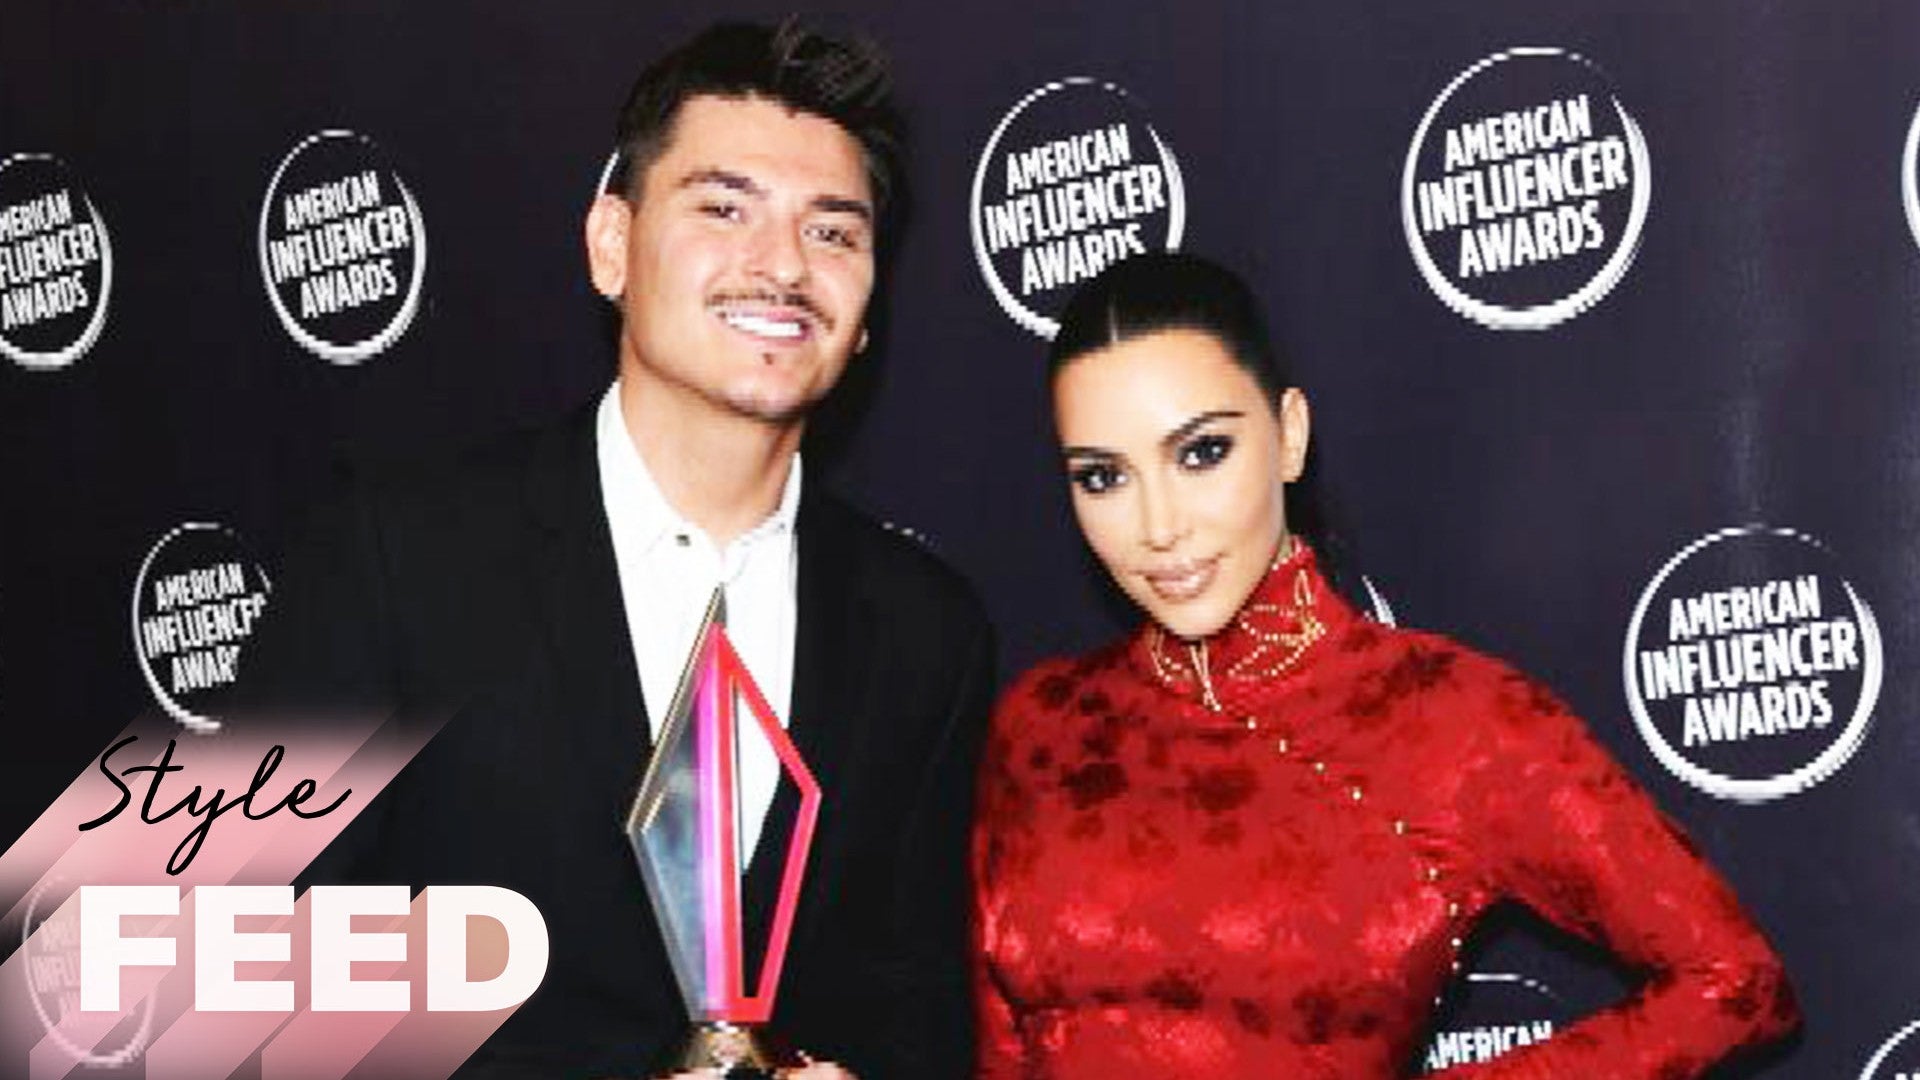 Kim Kardashian's make-up artist Mario Dedivanovic comes out in powerful  speech, The Independent